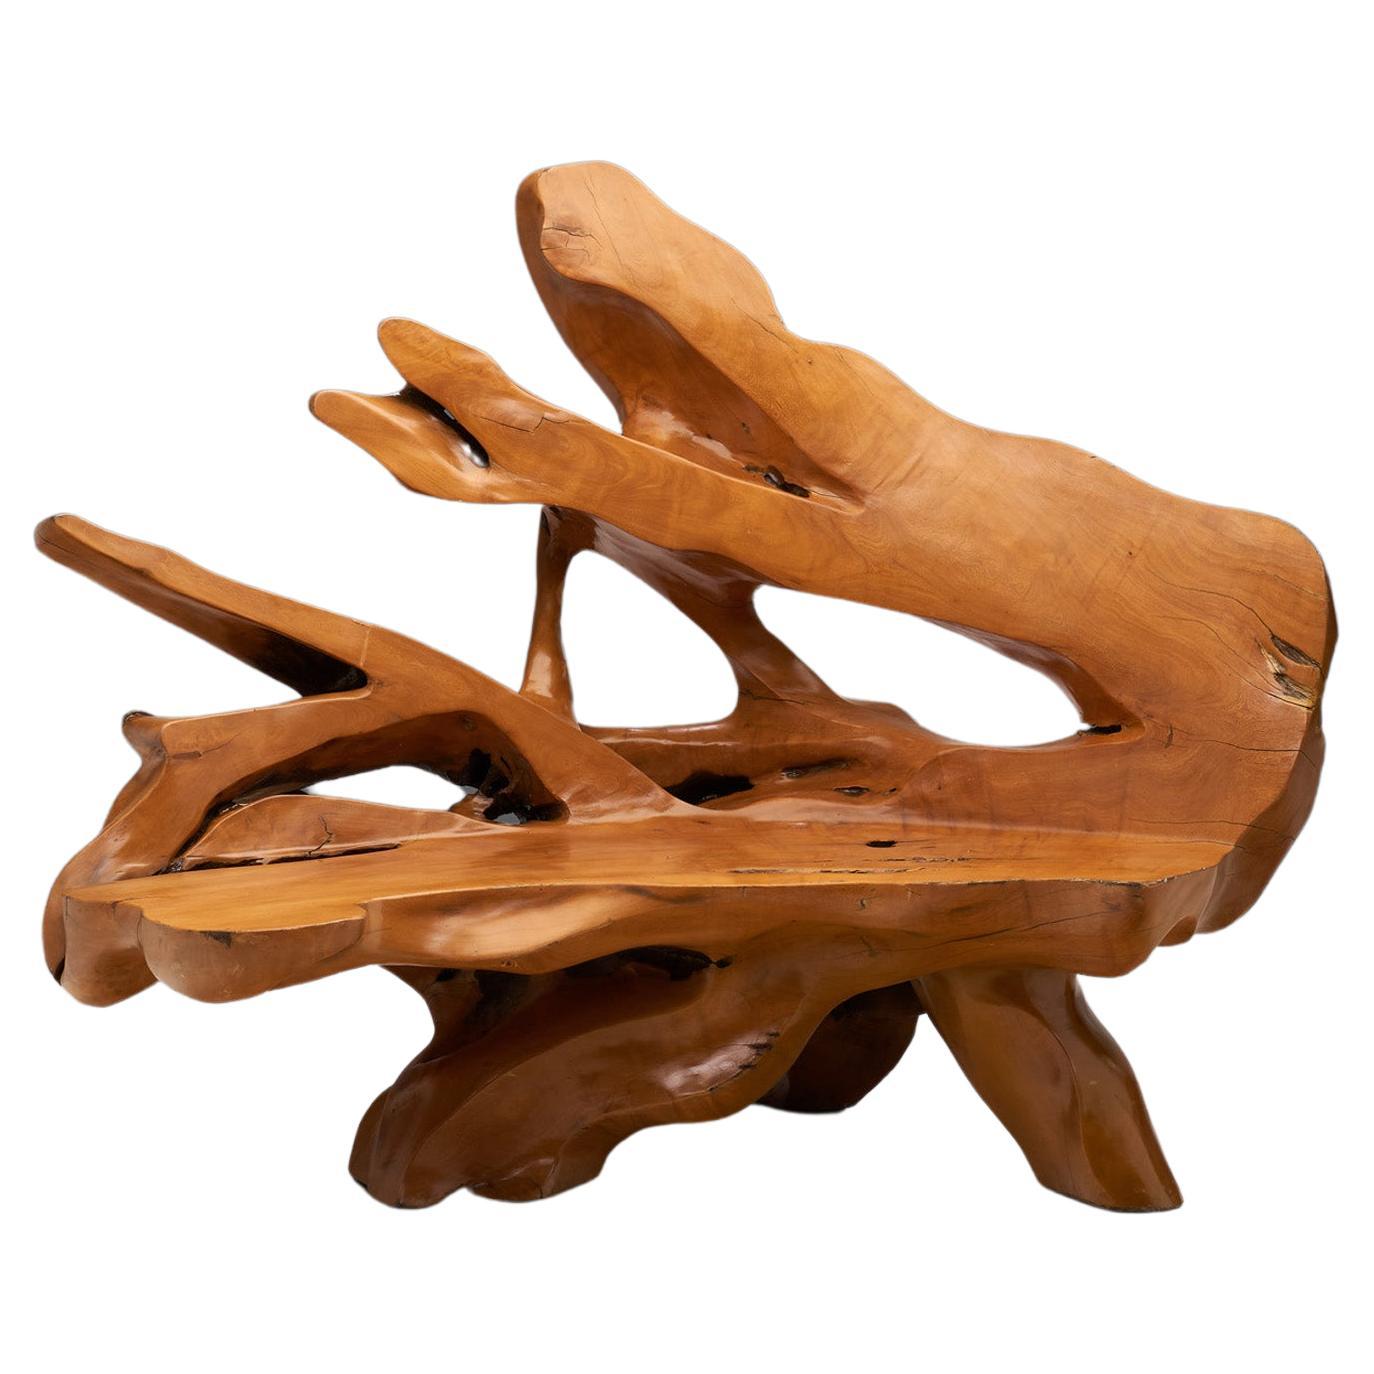 Handcrafted Teak Root Bench, Europe Late 20th Century